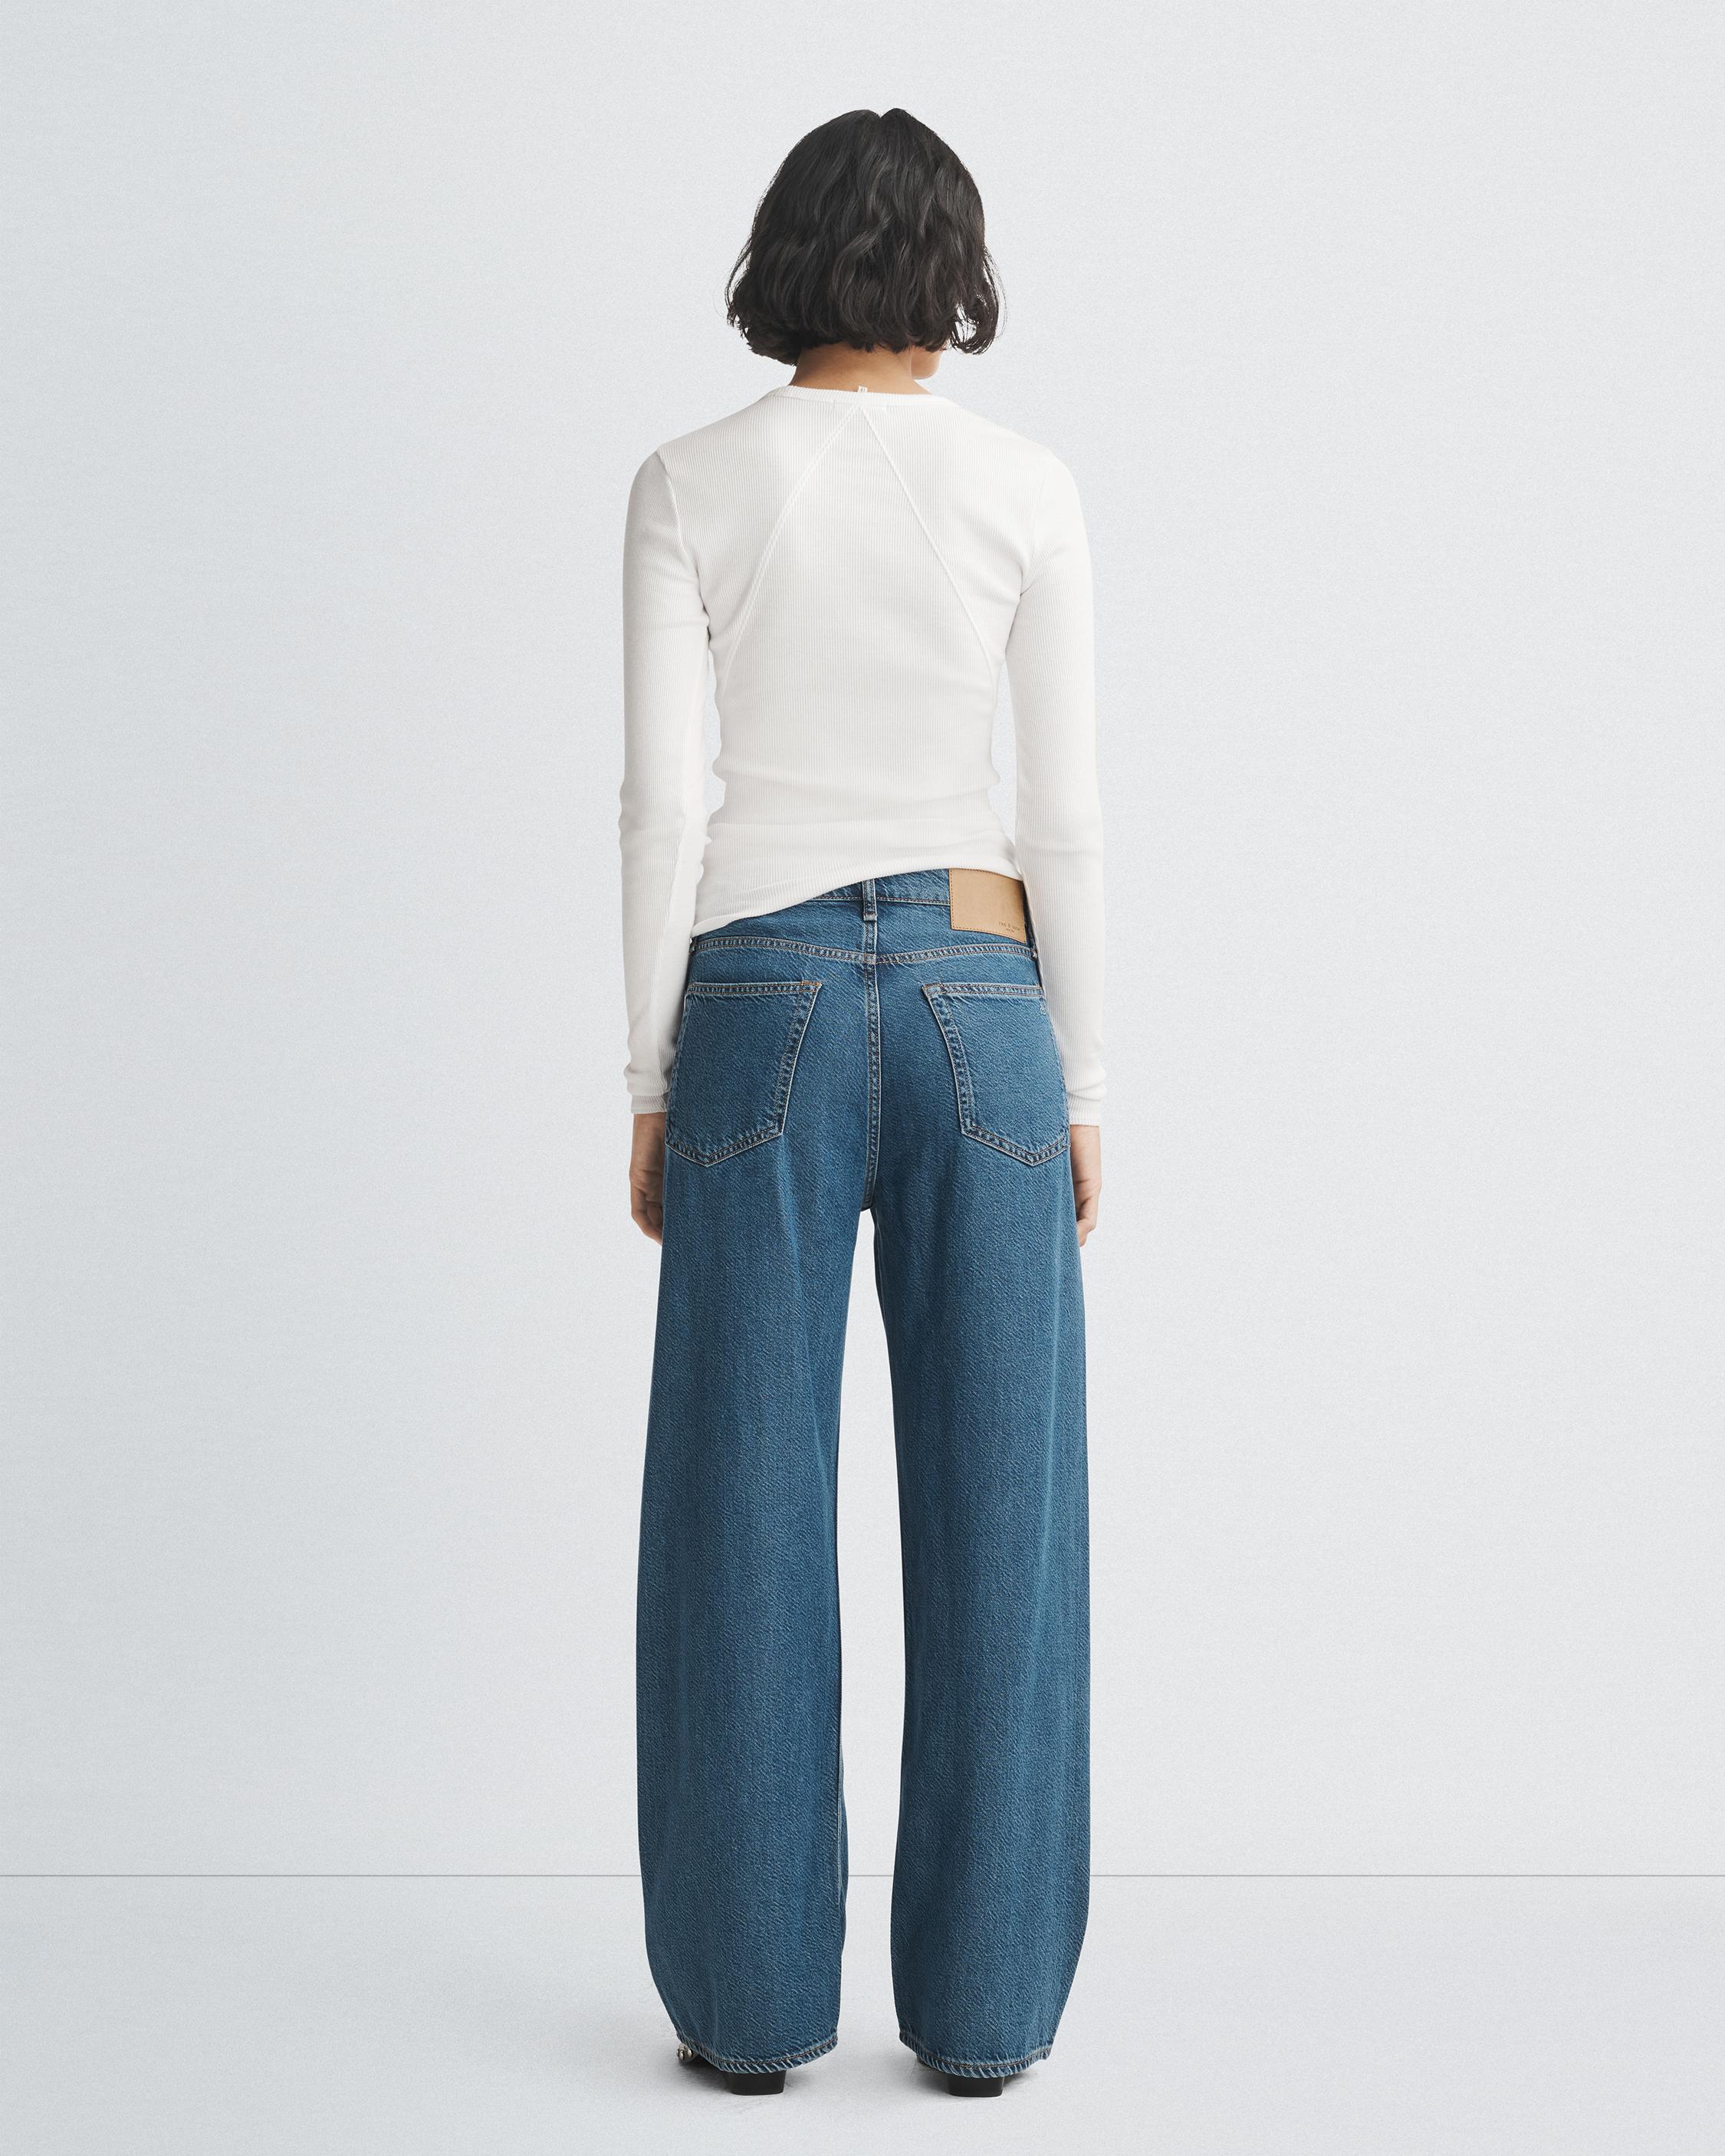 J.Jill - The perfect pant is here for you. Look here to